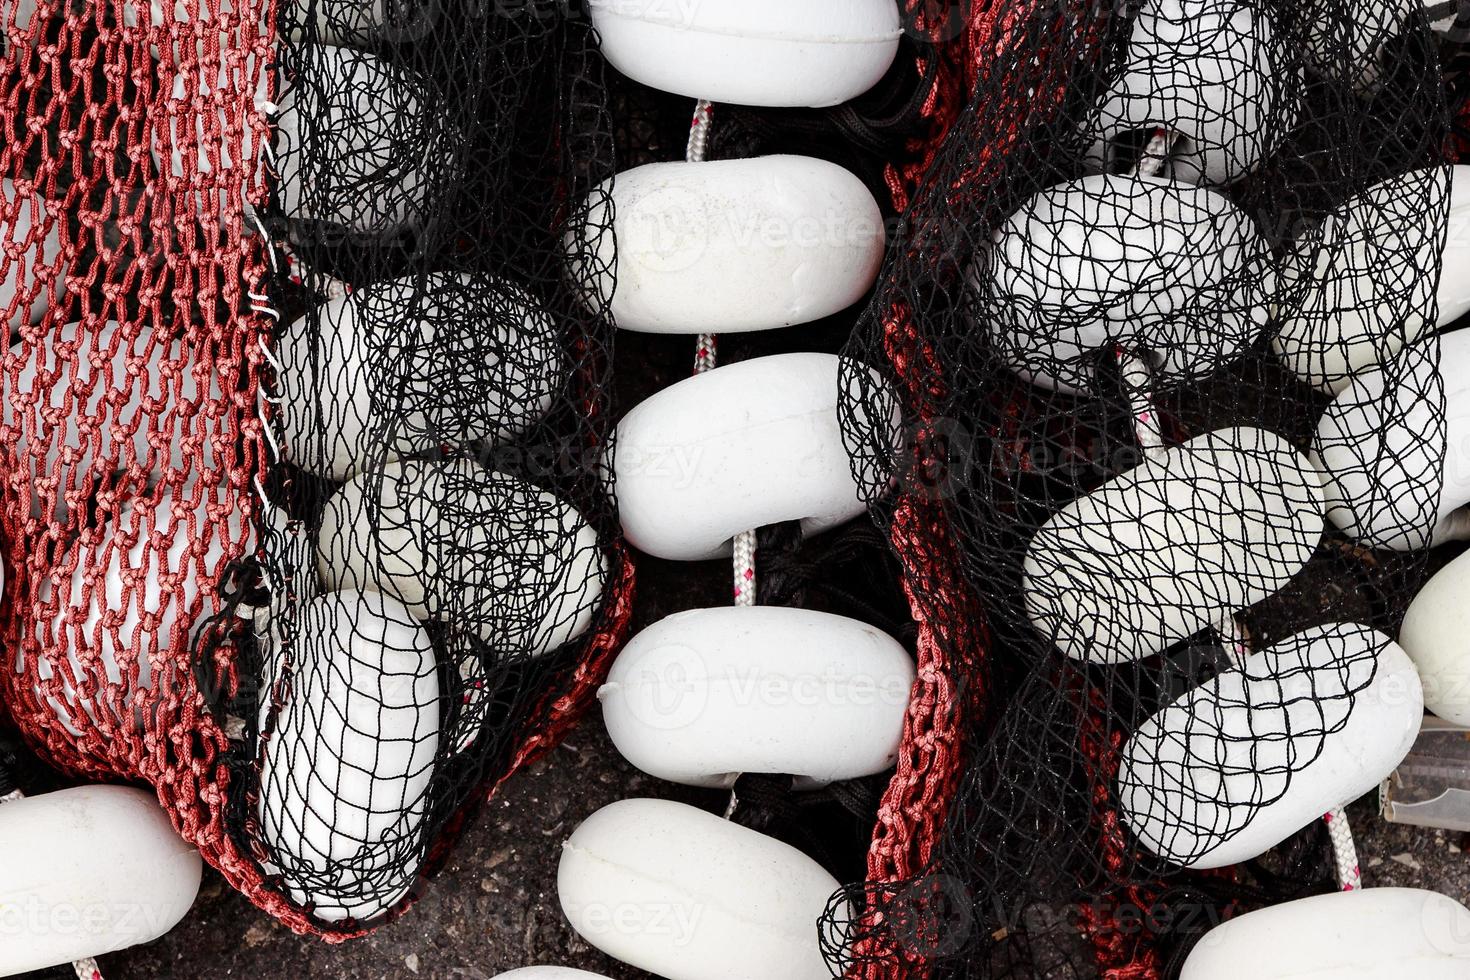 Fishing net black and red with white corks in Santona harbour, Cantabria, Spain. Horizontal image. photo